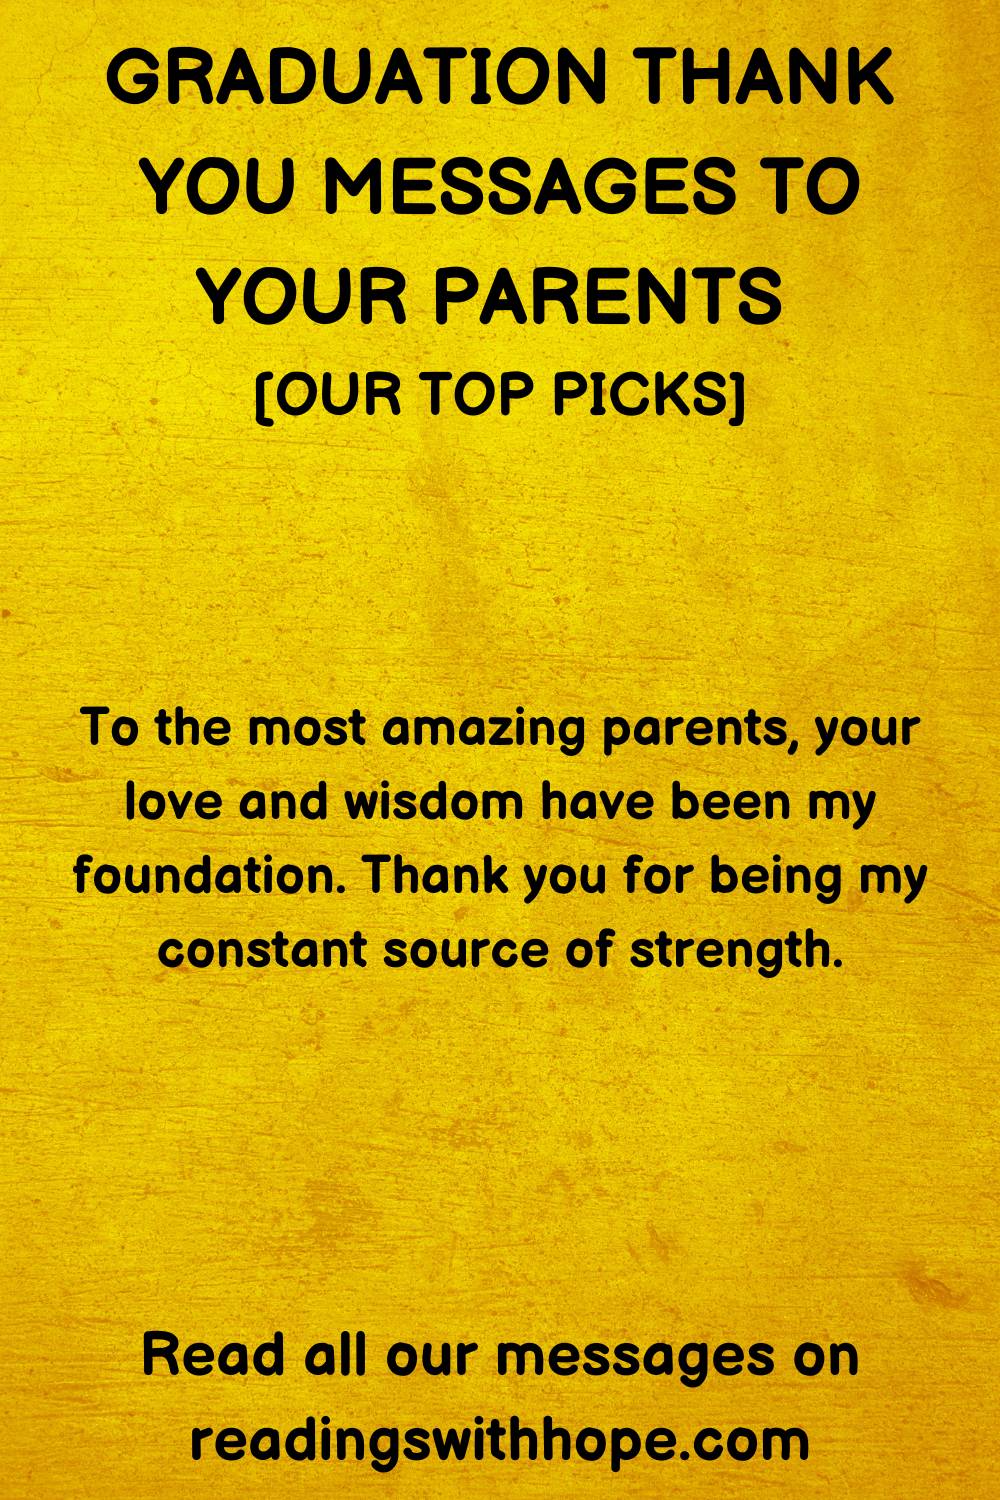 Graduation Thank You Message to your parents
